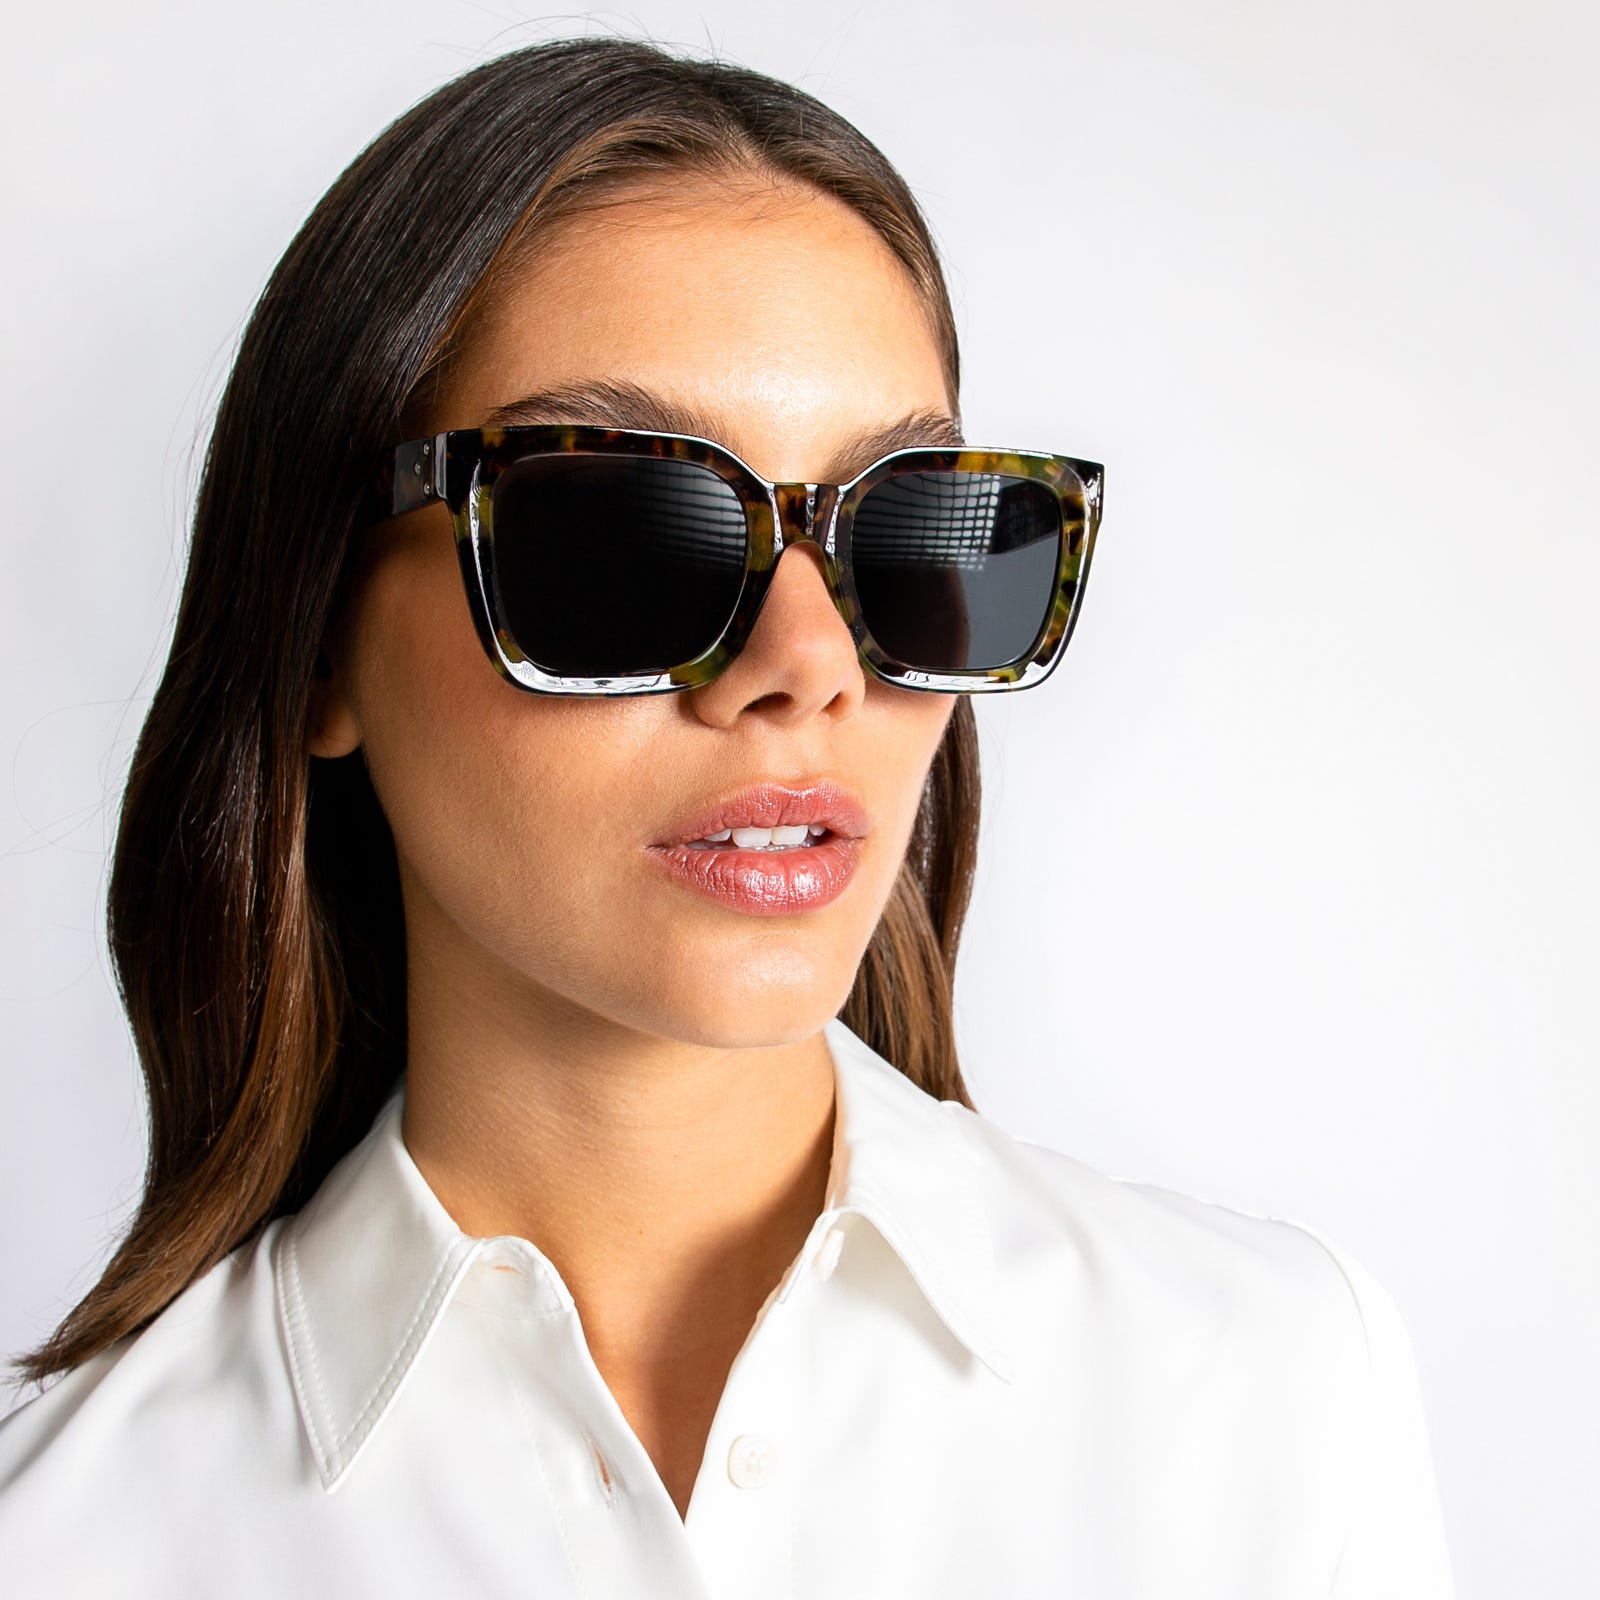 Square sunglasses with acetate frames